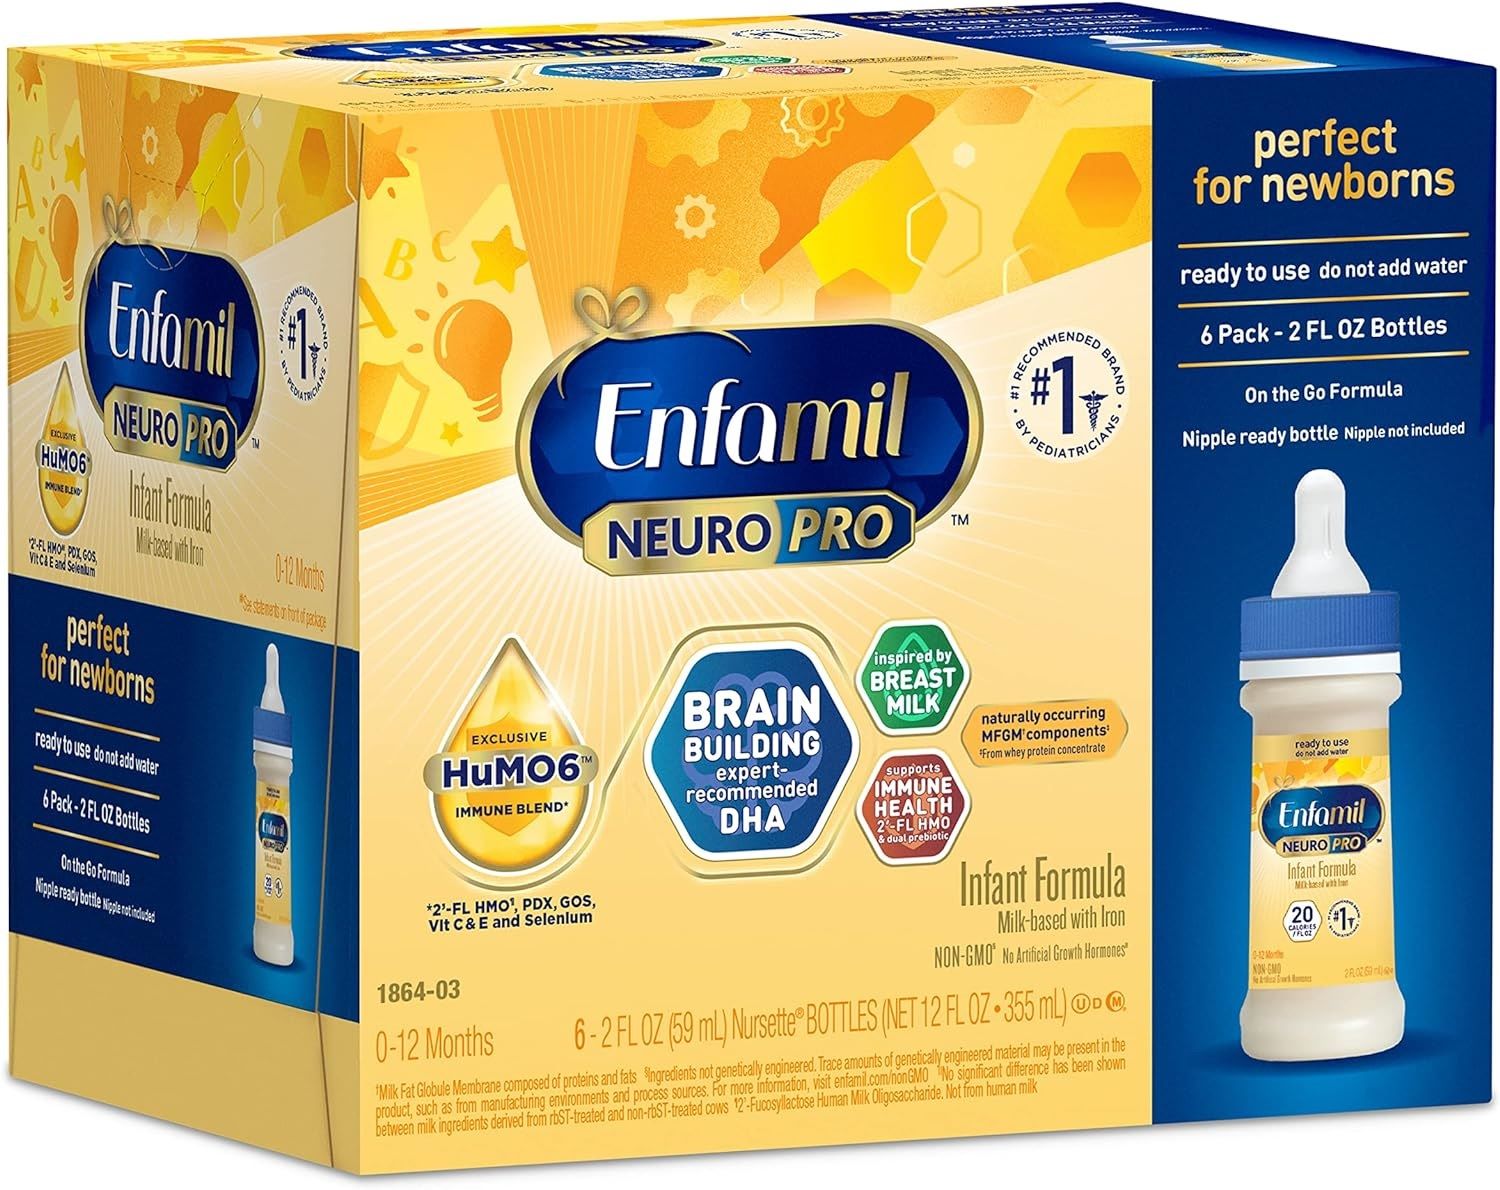 How To Store Ready-To-Use Enfamil Neuropro